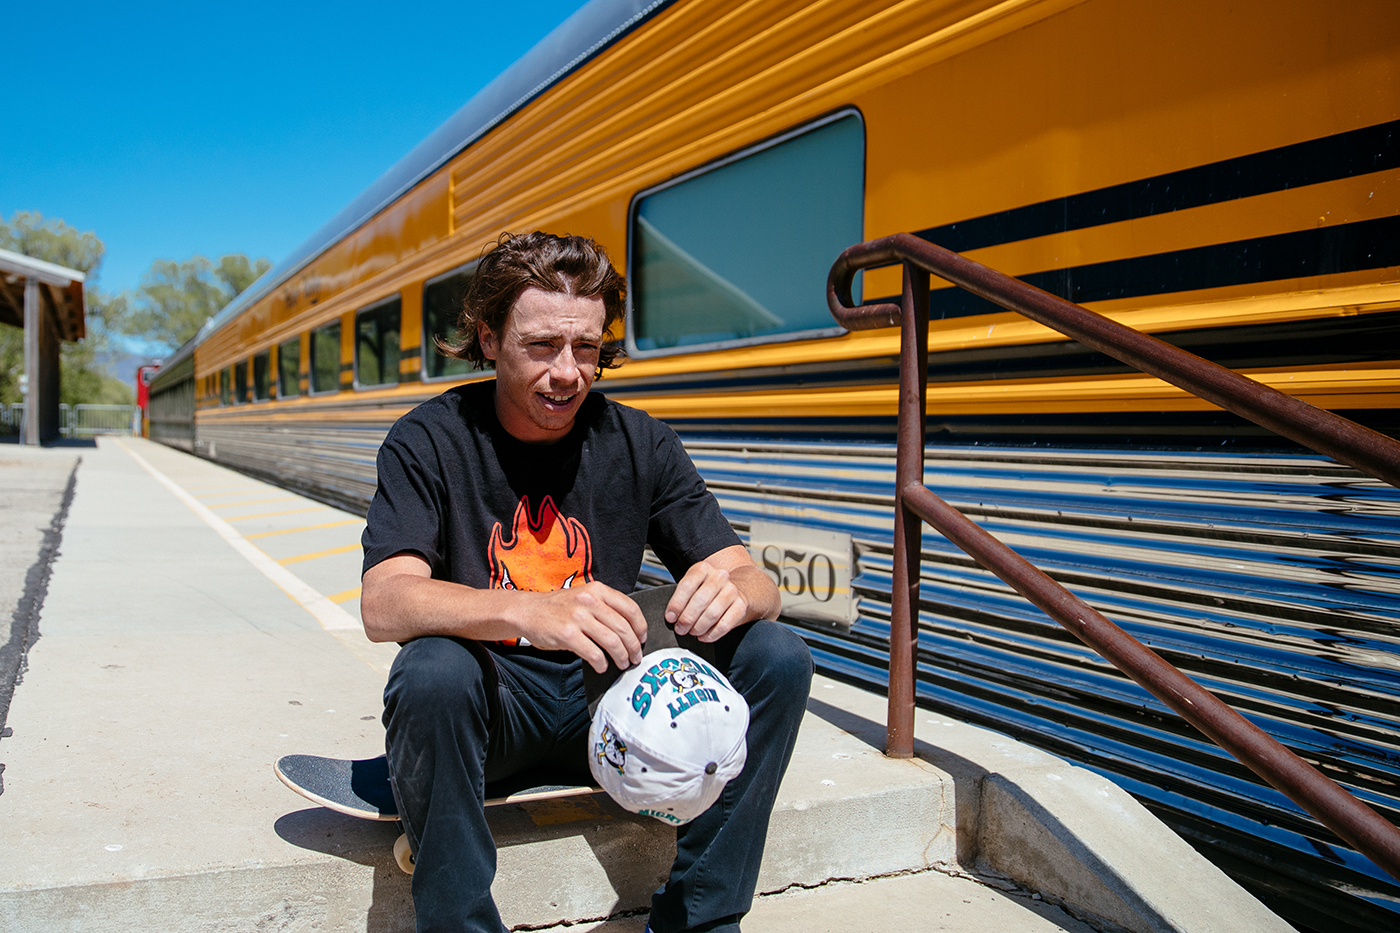 Heber’s Riley Winch celebrates the local community of skaters and advocates for more skating events that bring people together.